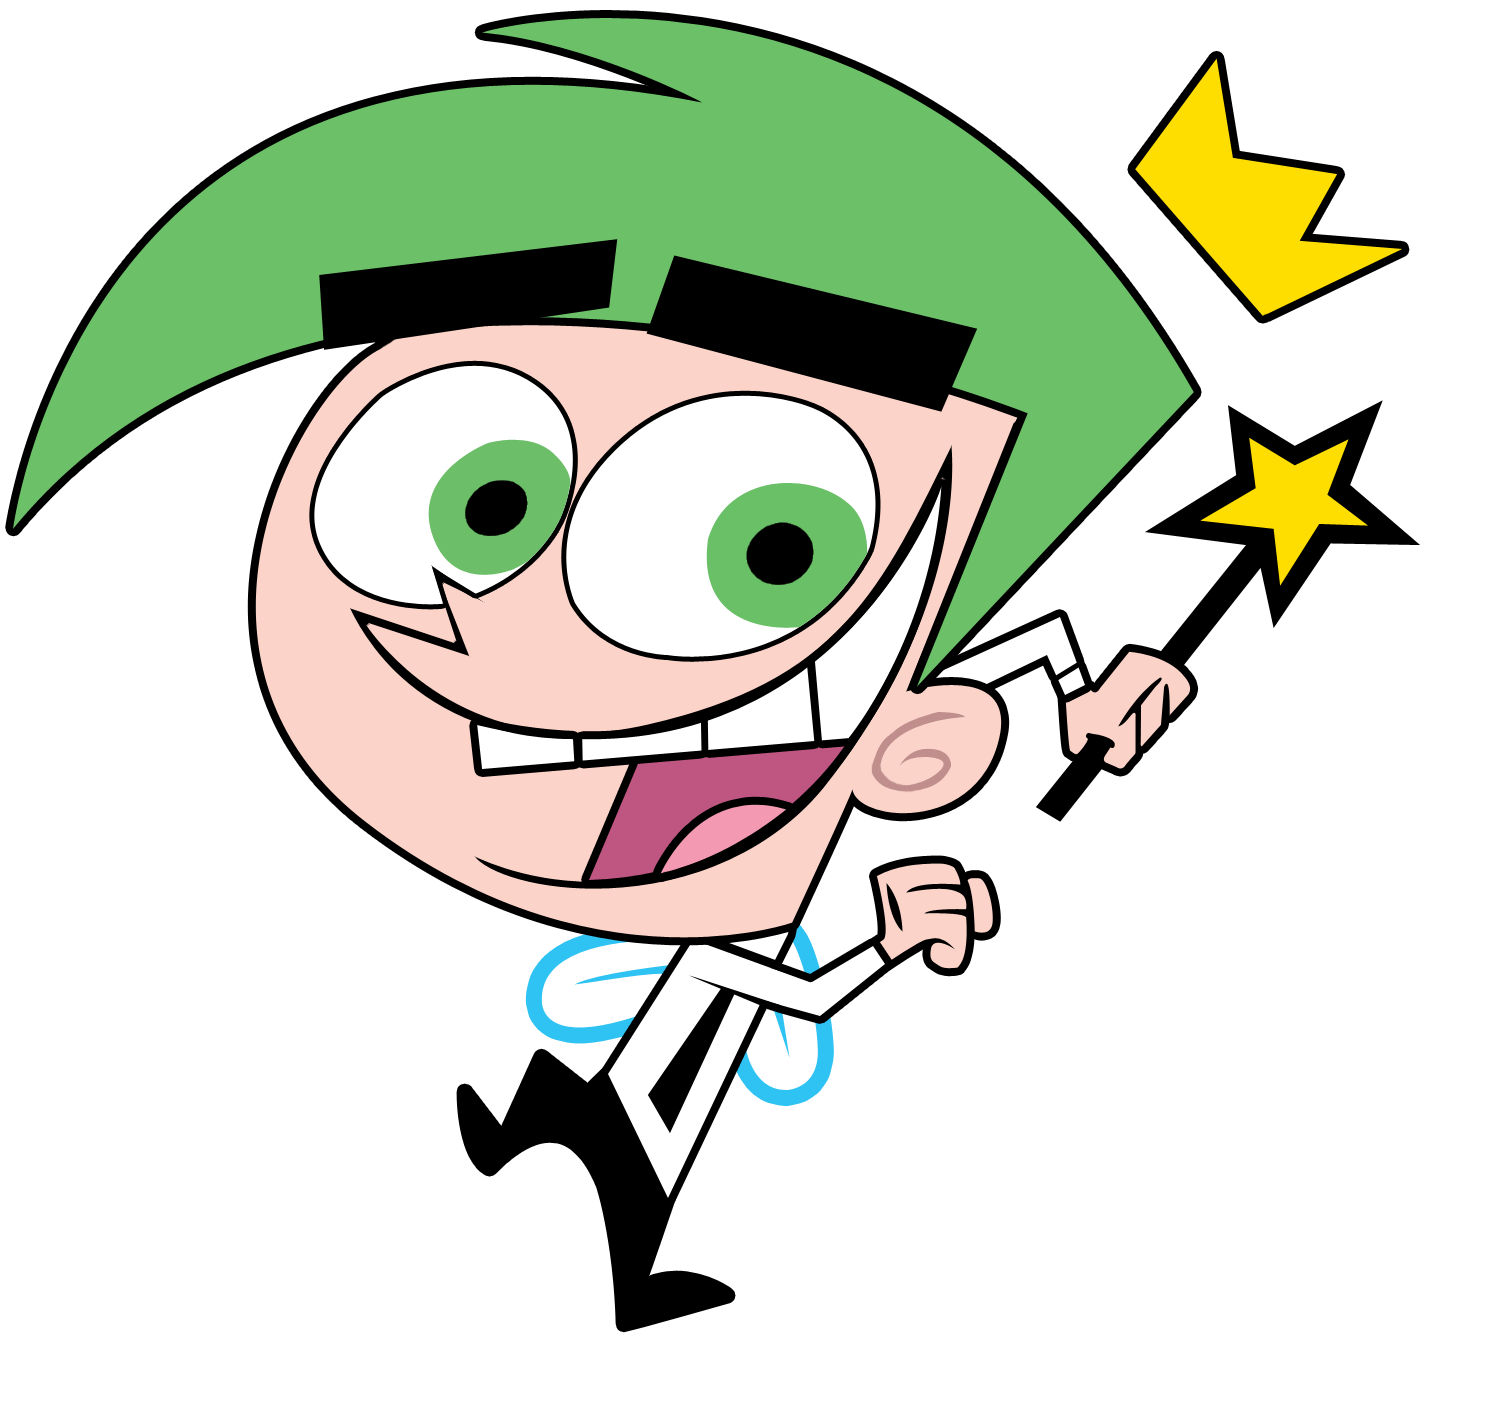 Universe clipart space wallpaper. Timmy turner fairly odd